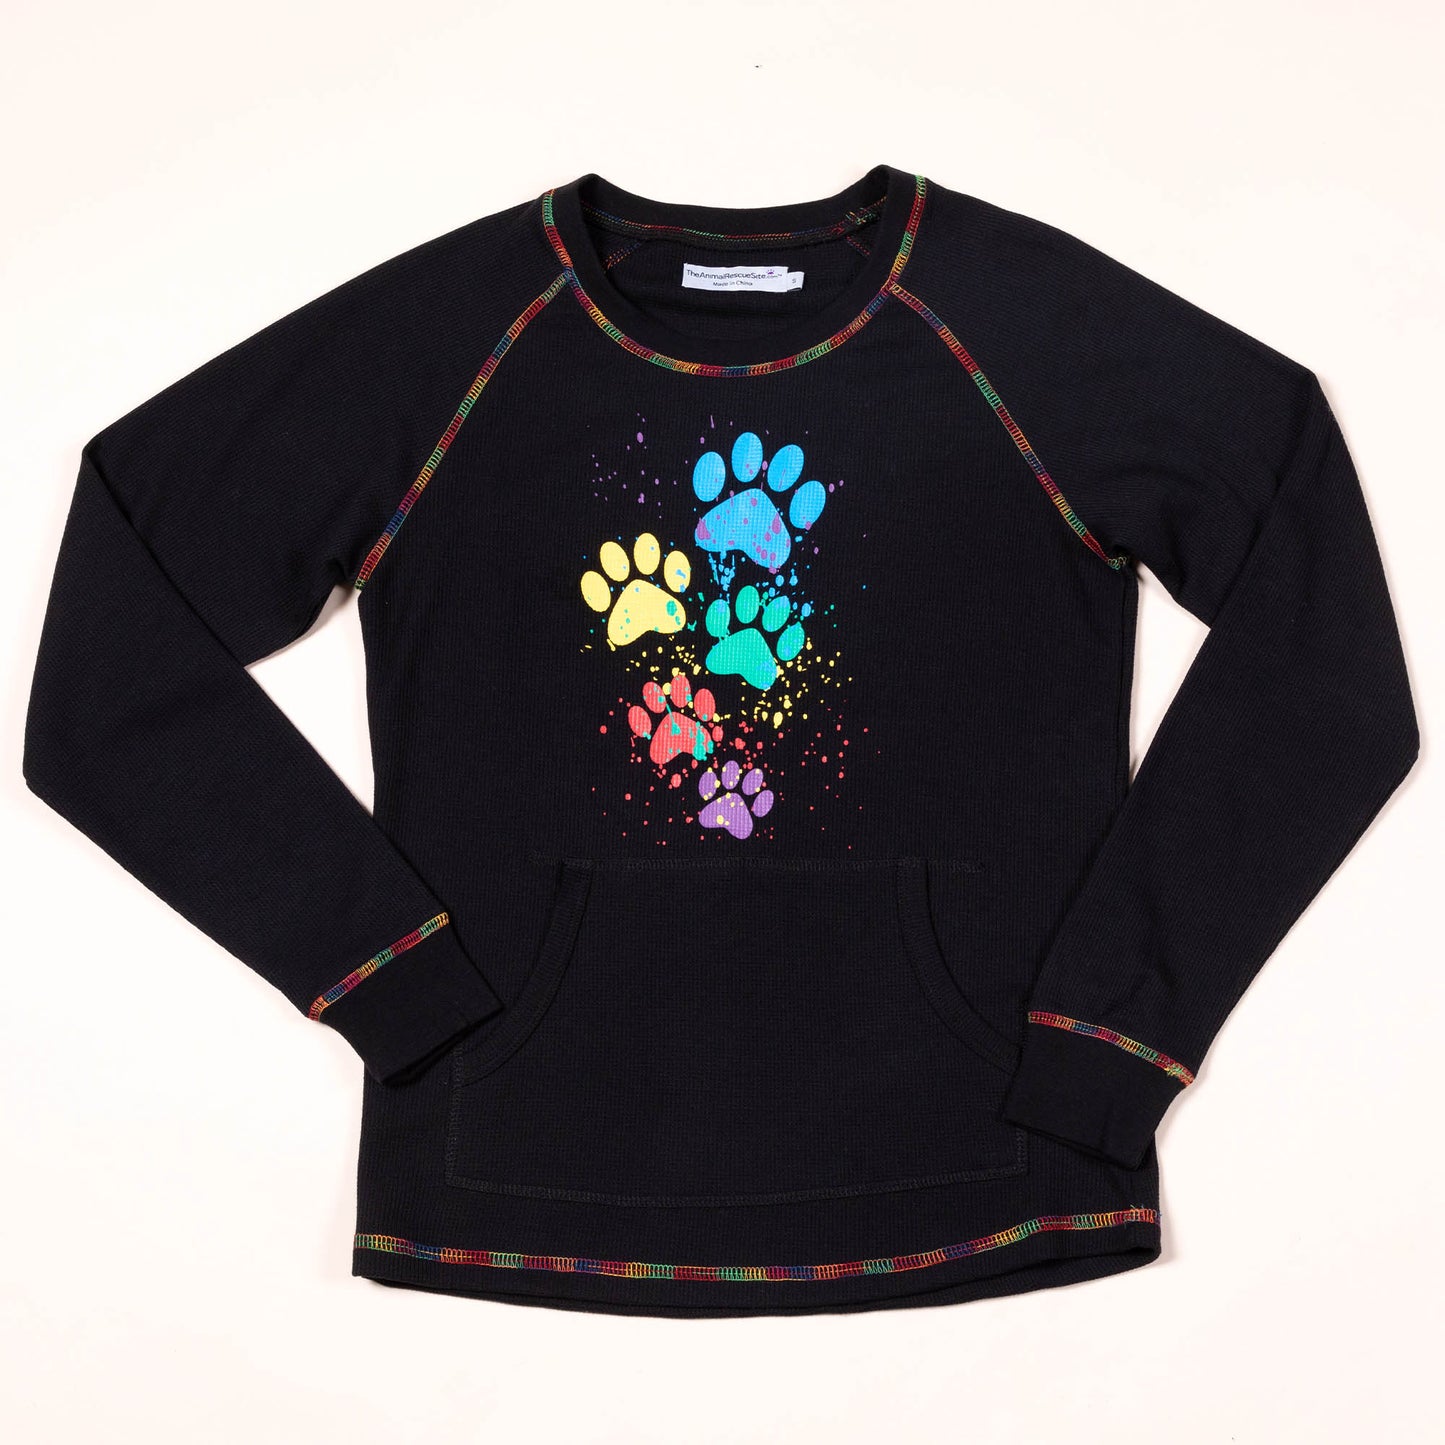 Paint & Paws Rainbow Stitch Thermal Top